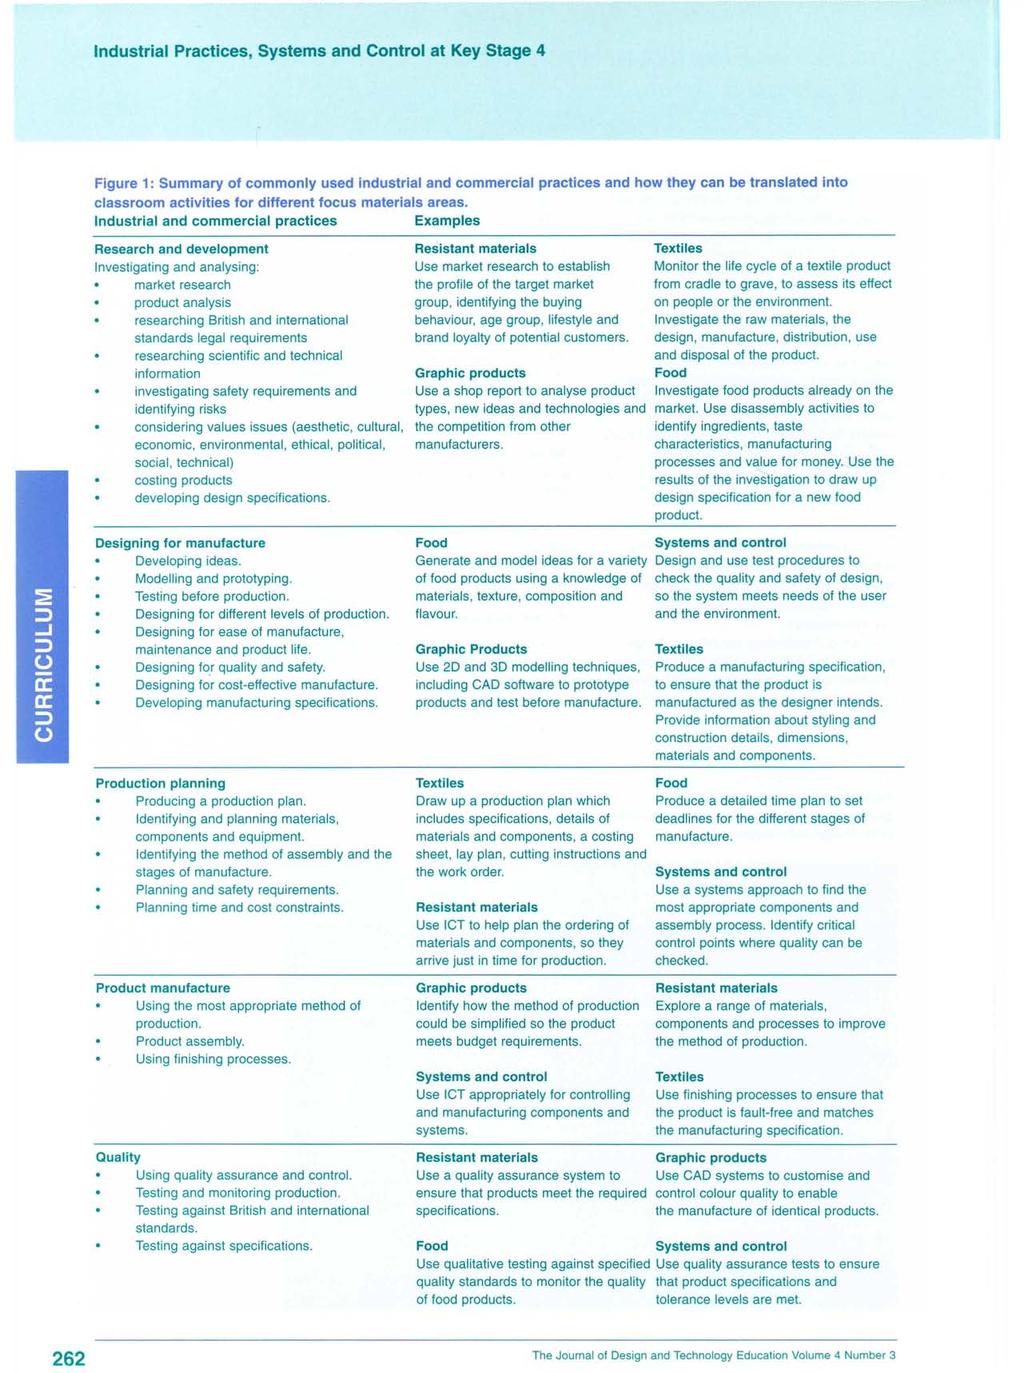 Figure 1: Summary of commonly used industrial and commercial practices and how they can be translated into classroom activities for different focus materials areas.